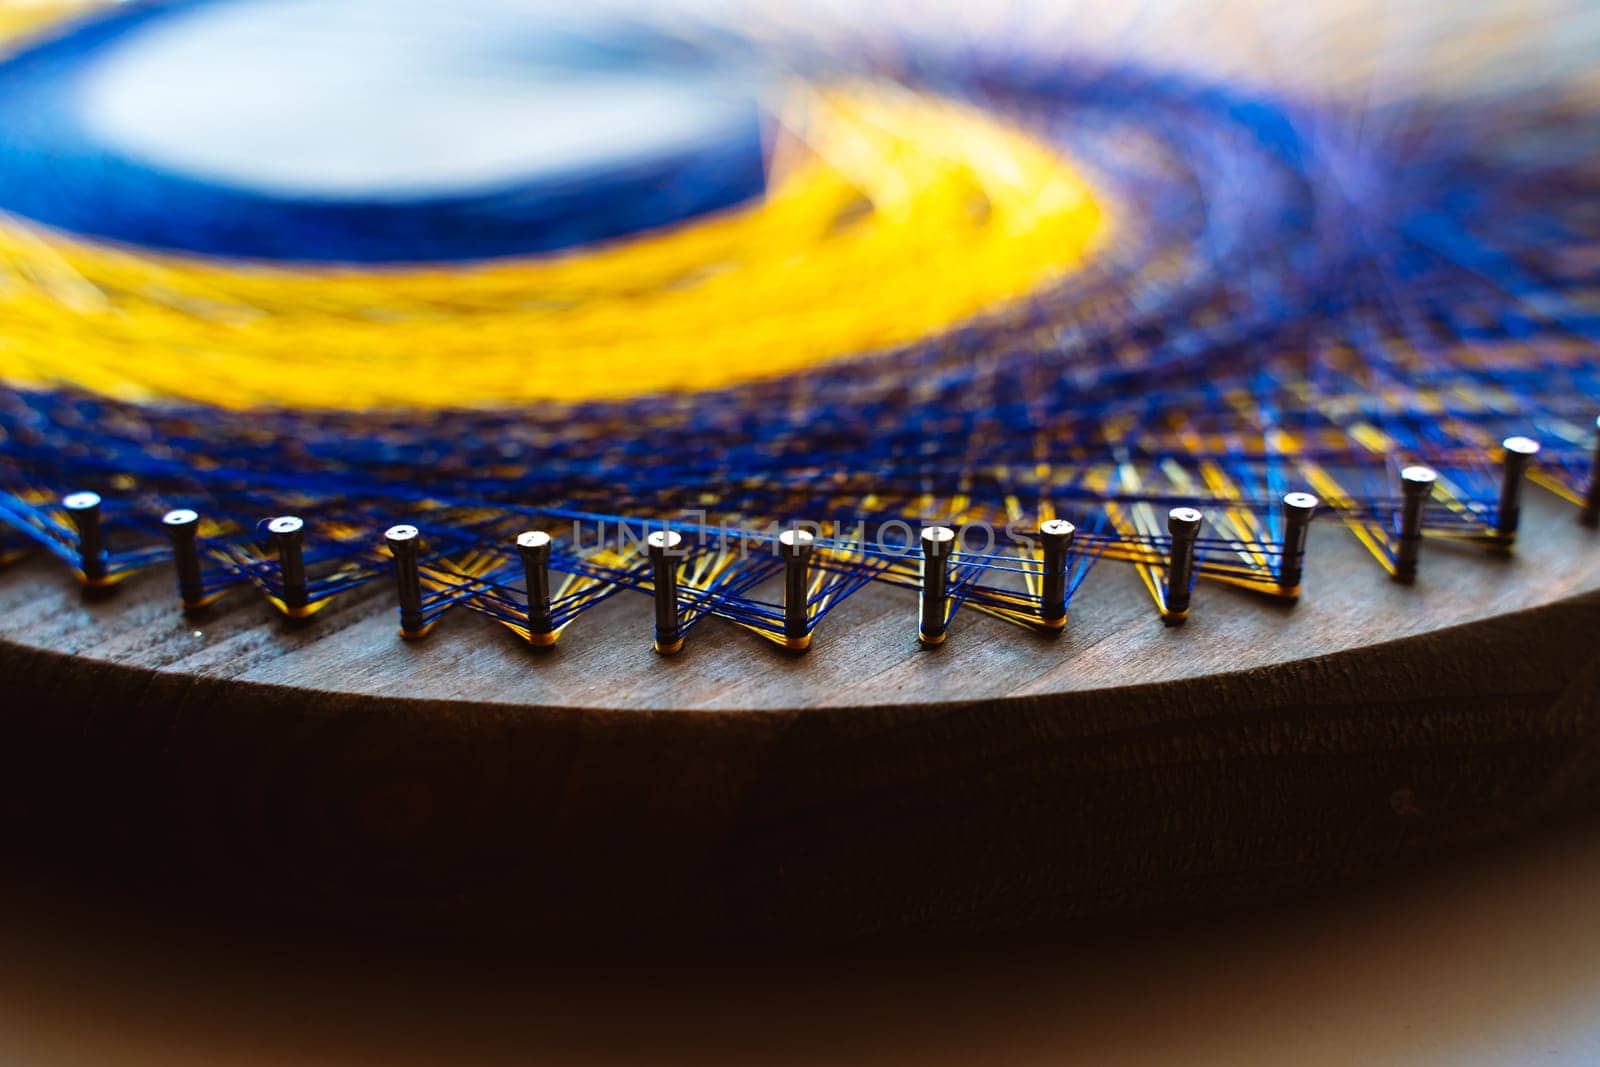 Colored thread mandala on a wooden board with nails. Mandala Moon Harmony Sun esotericism and psychology pictures from yellow and blue silk threads. by Matiunina